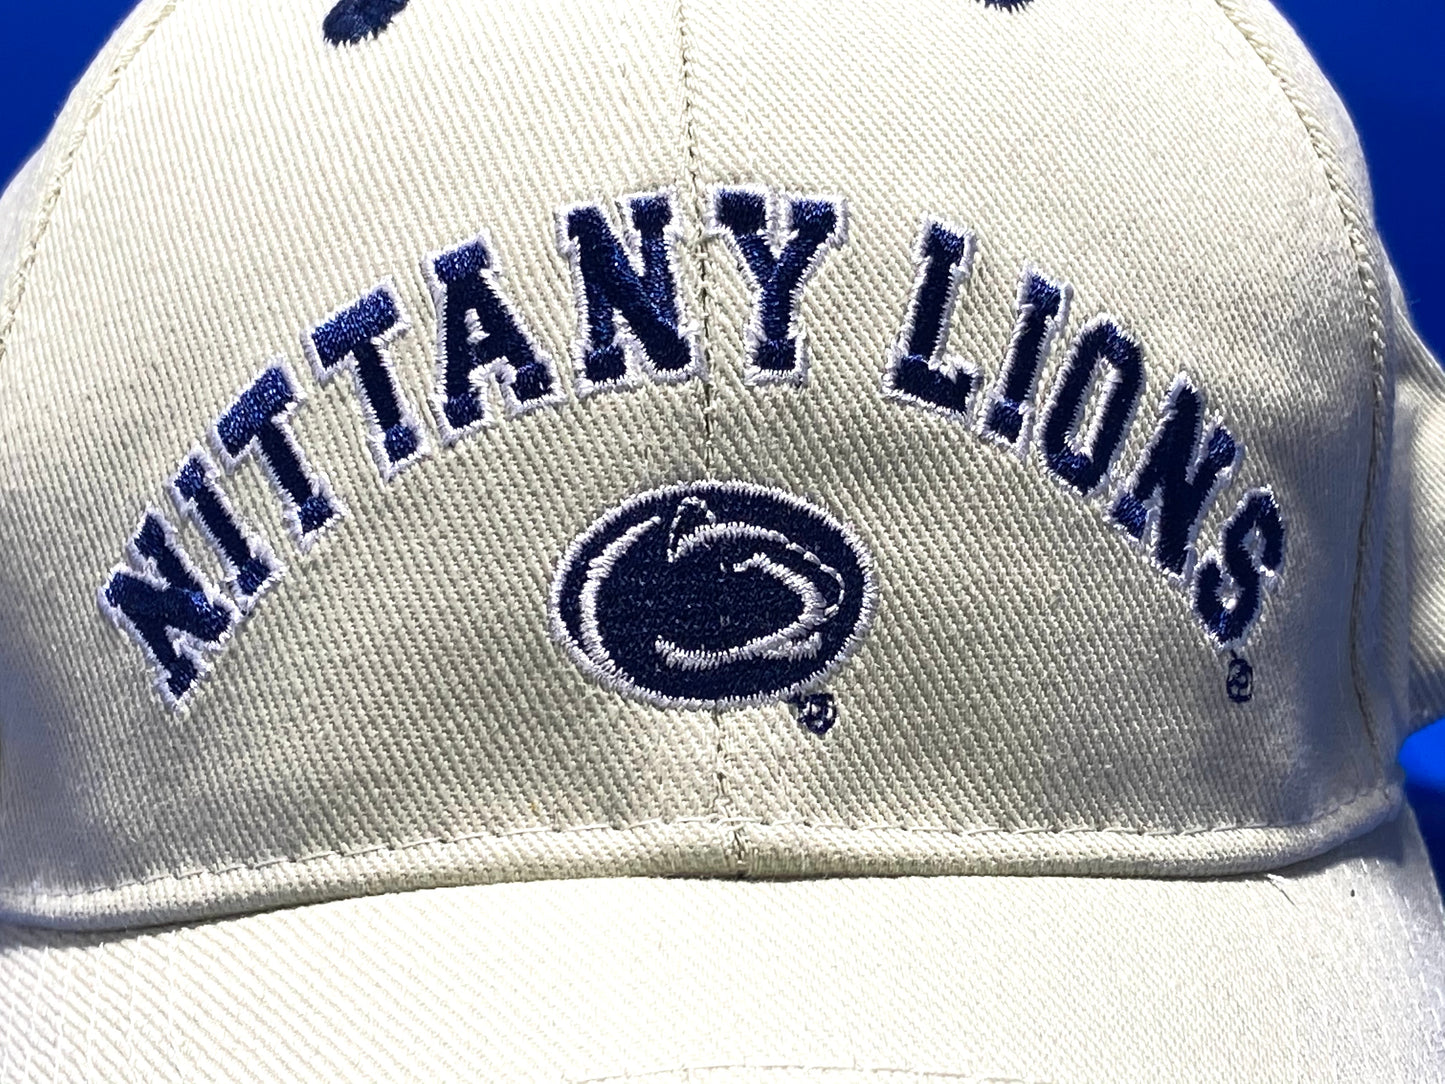 Penn State Nittany Lions Vintage Adult NCAA Cotton Logo Cap by Drew Pearson